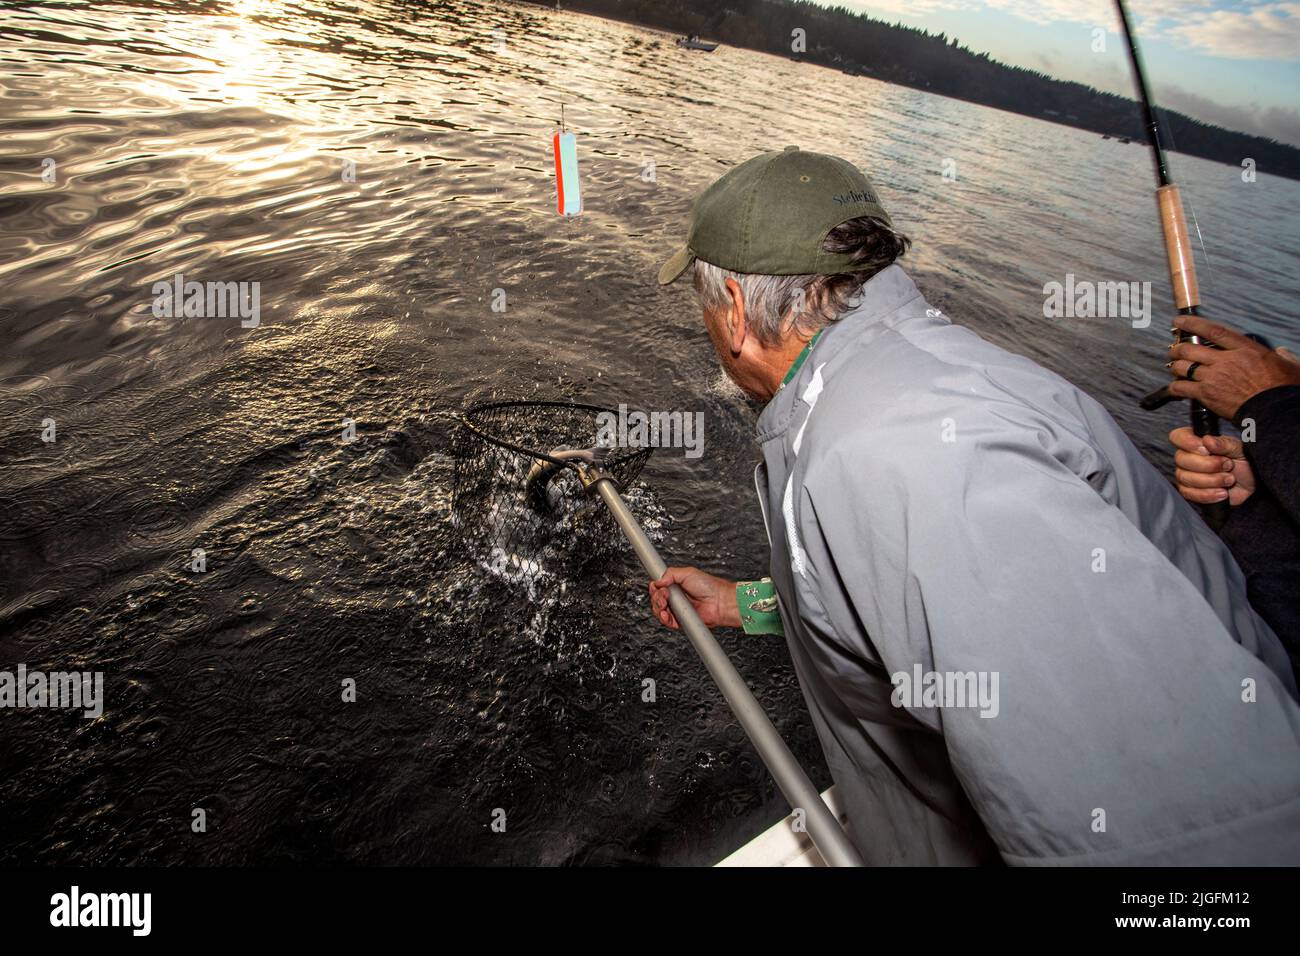 WA20633-00....WASHINGTON - Phil Russell nets a salmon  caught in the Puget sound. Stock Photo